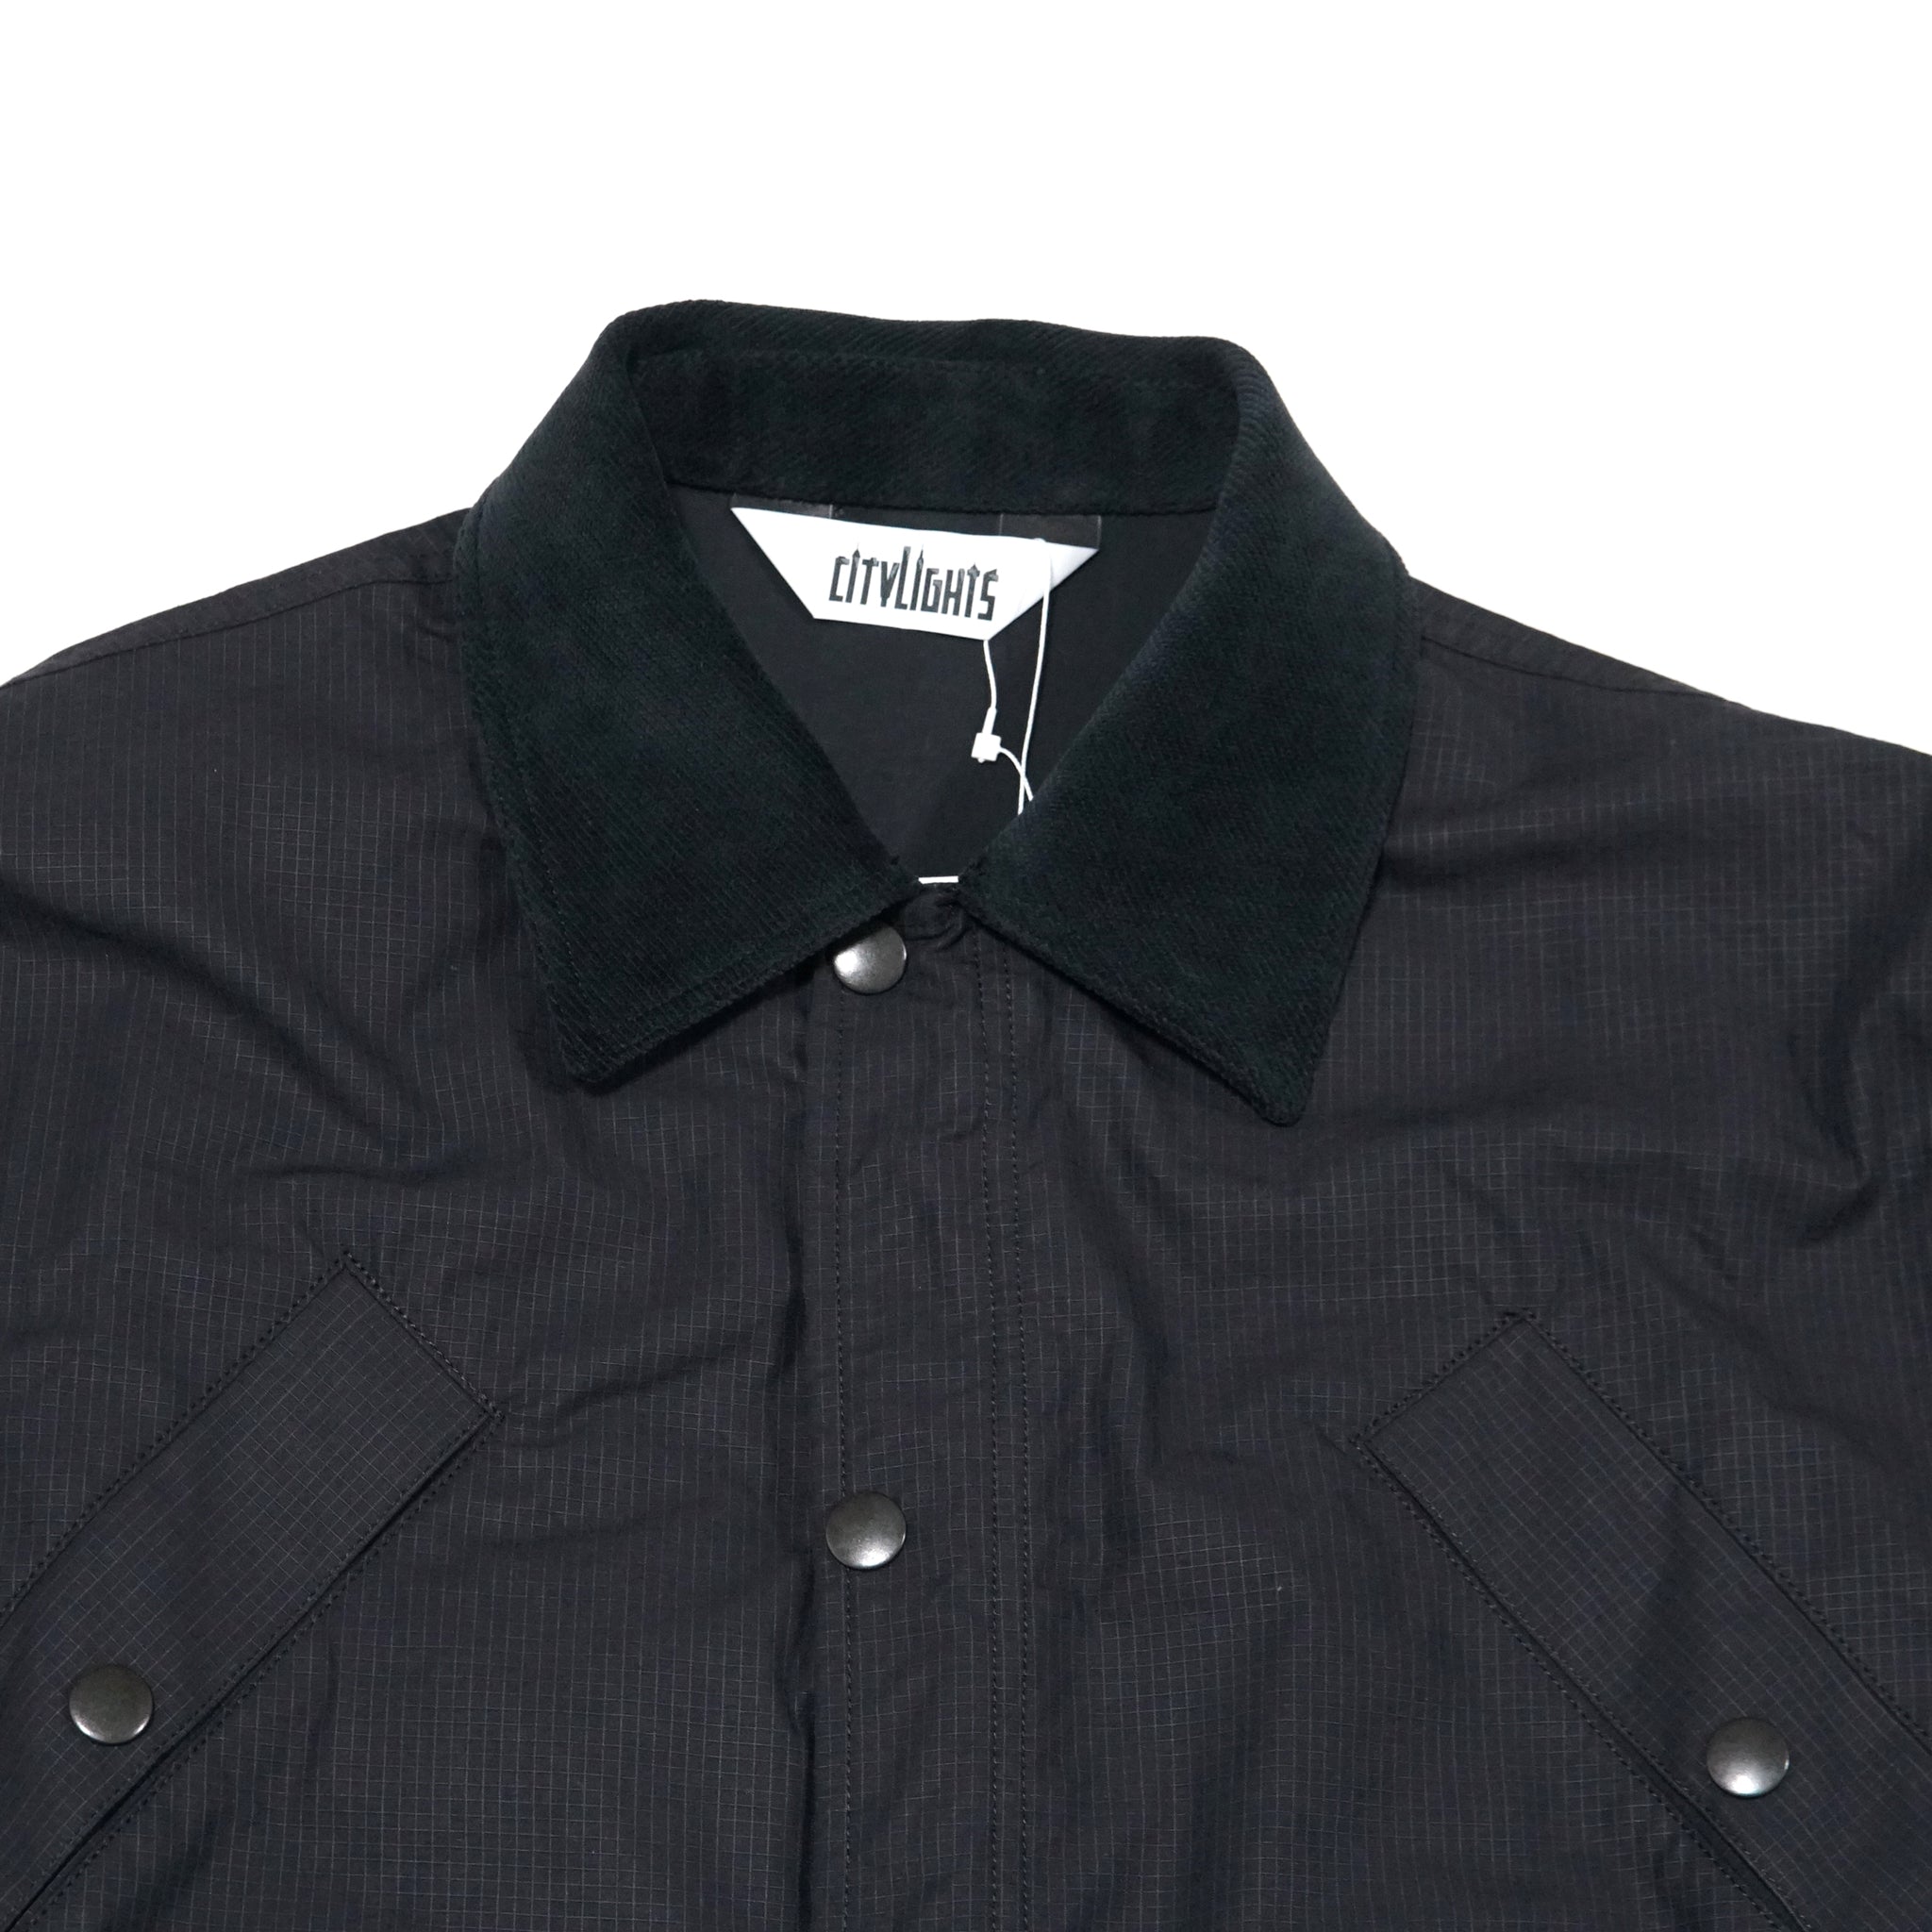 Name: JUNGLE JACKET | Color: Black Ripstop | Size: One Size 【CITYLIGHTS PRODUCTS_シティライツプロダクツ】